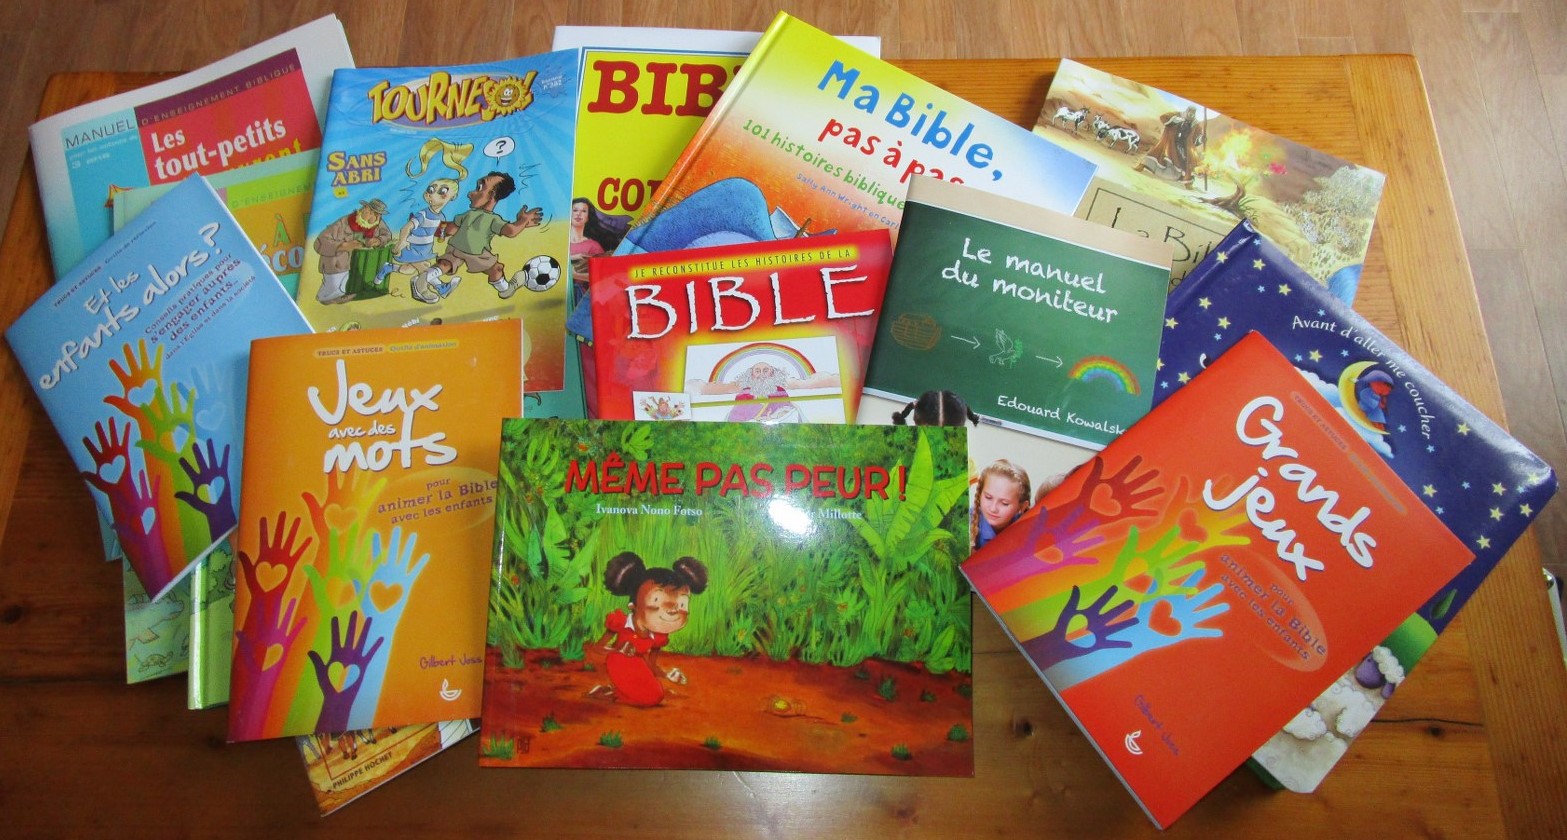 New books for our library in Kikimi